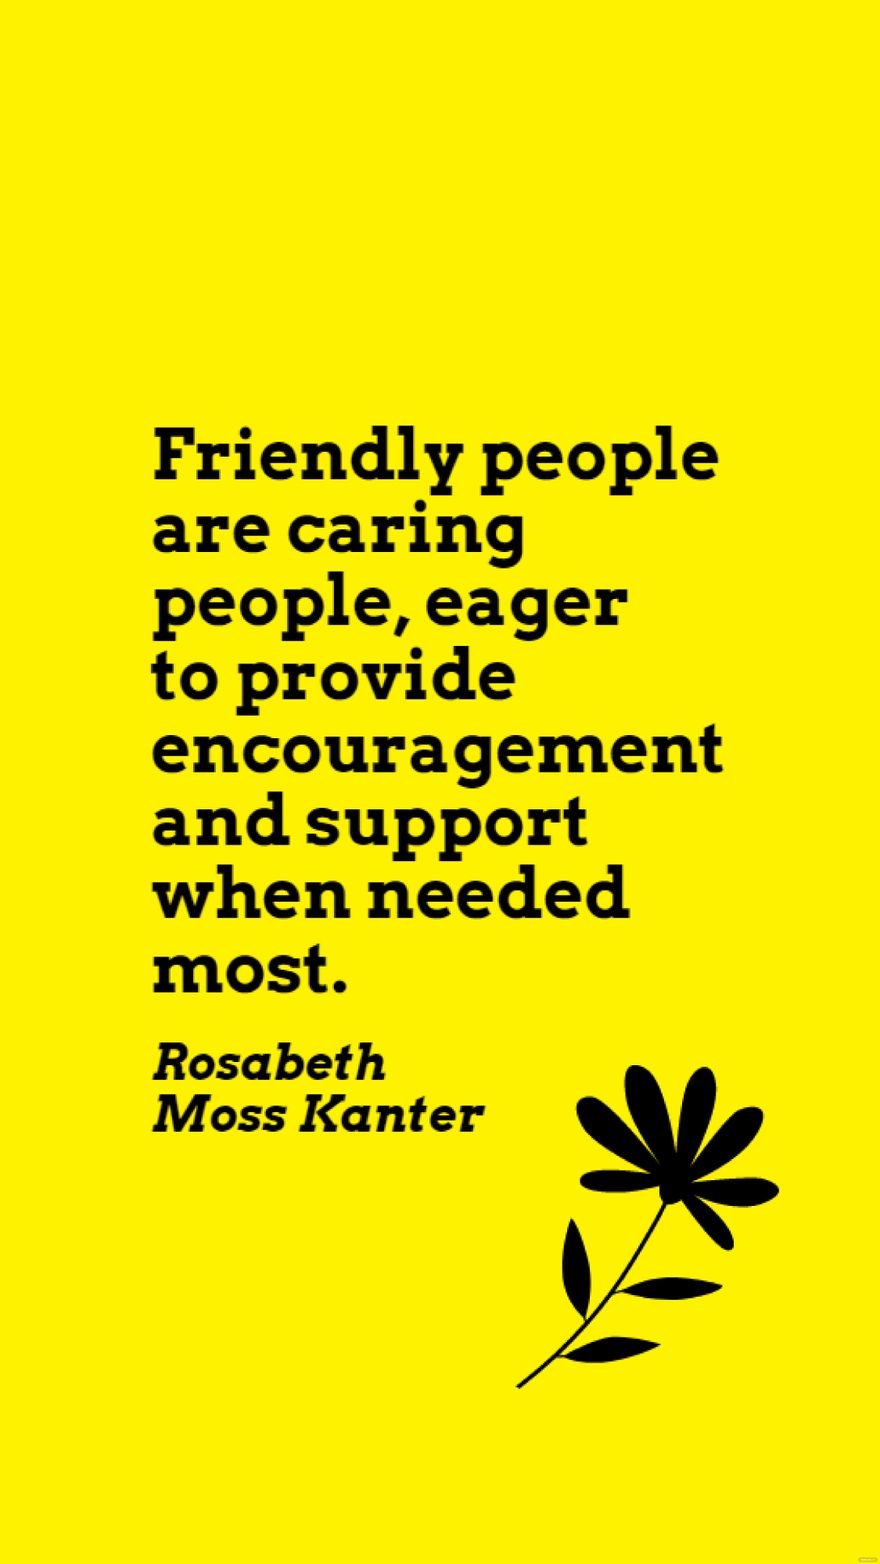 Free Rosabeth Moss Kanter - Friendly people are caring people, eager to provide encouragement and support when needed most. in JPG